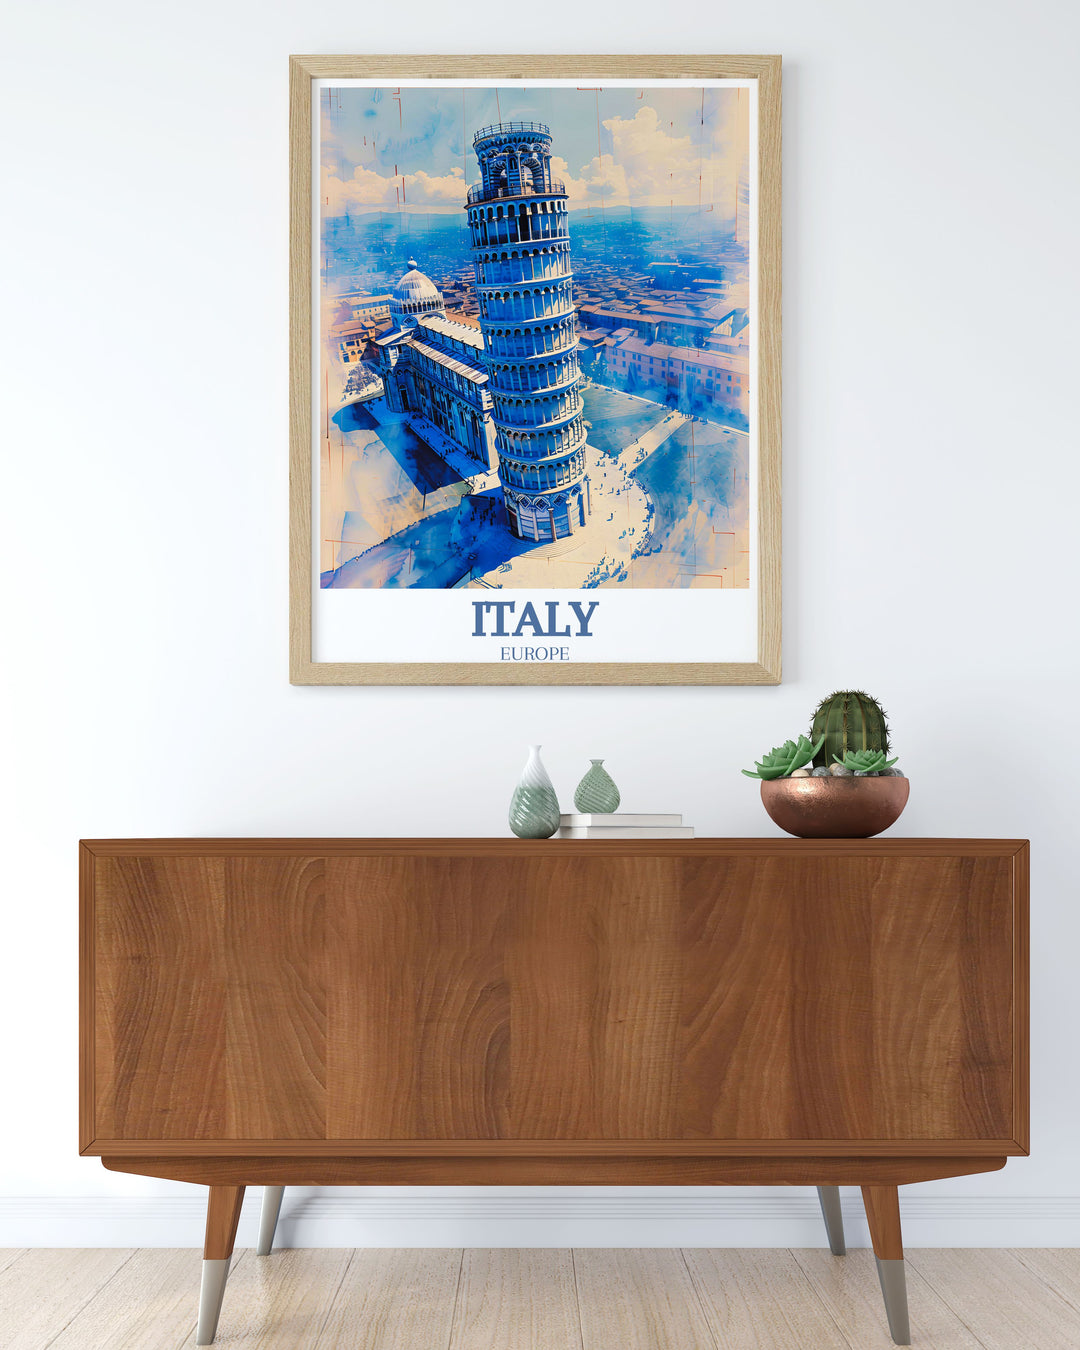 Highlighting the Leaning Towers unique tilt and the Pisa Cathedrals grandeur, this travel poster is perfect for adding a touch of Italys historic charm to your space.